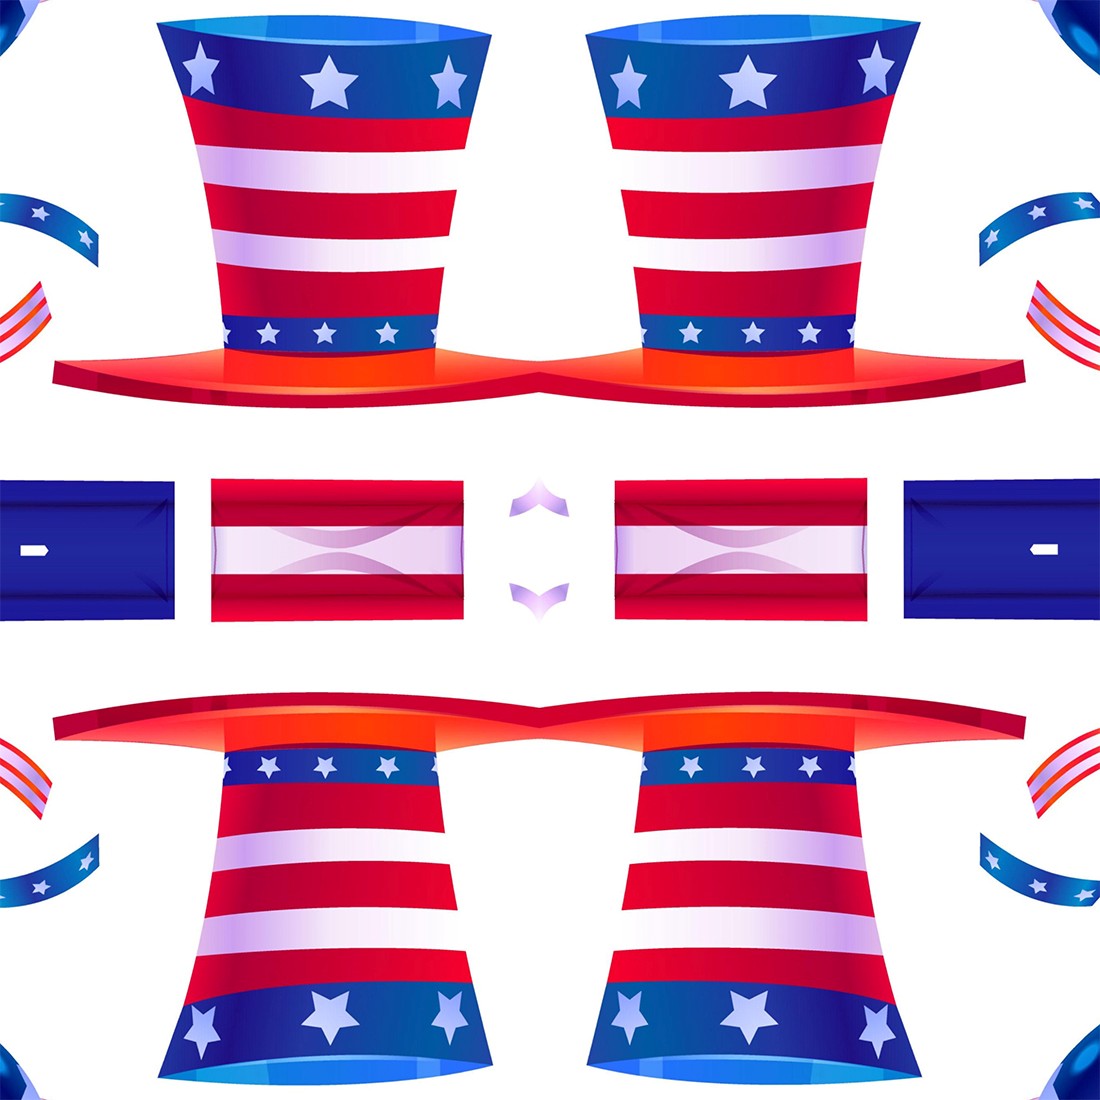 American Style Red White and Blue Background JPG 300 DPI cover image.